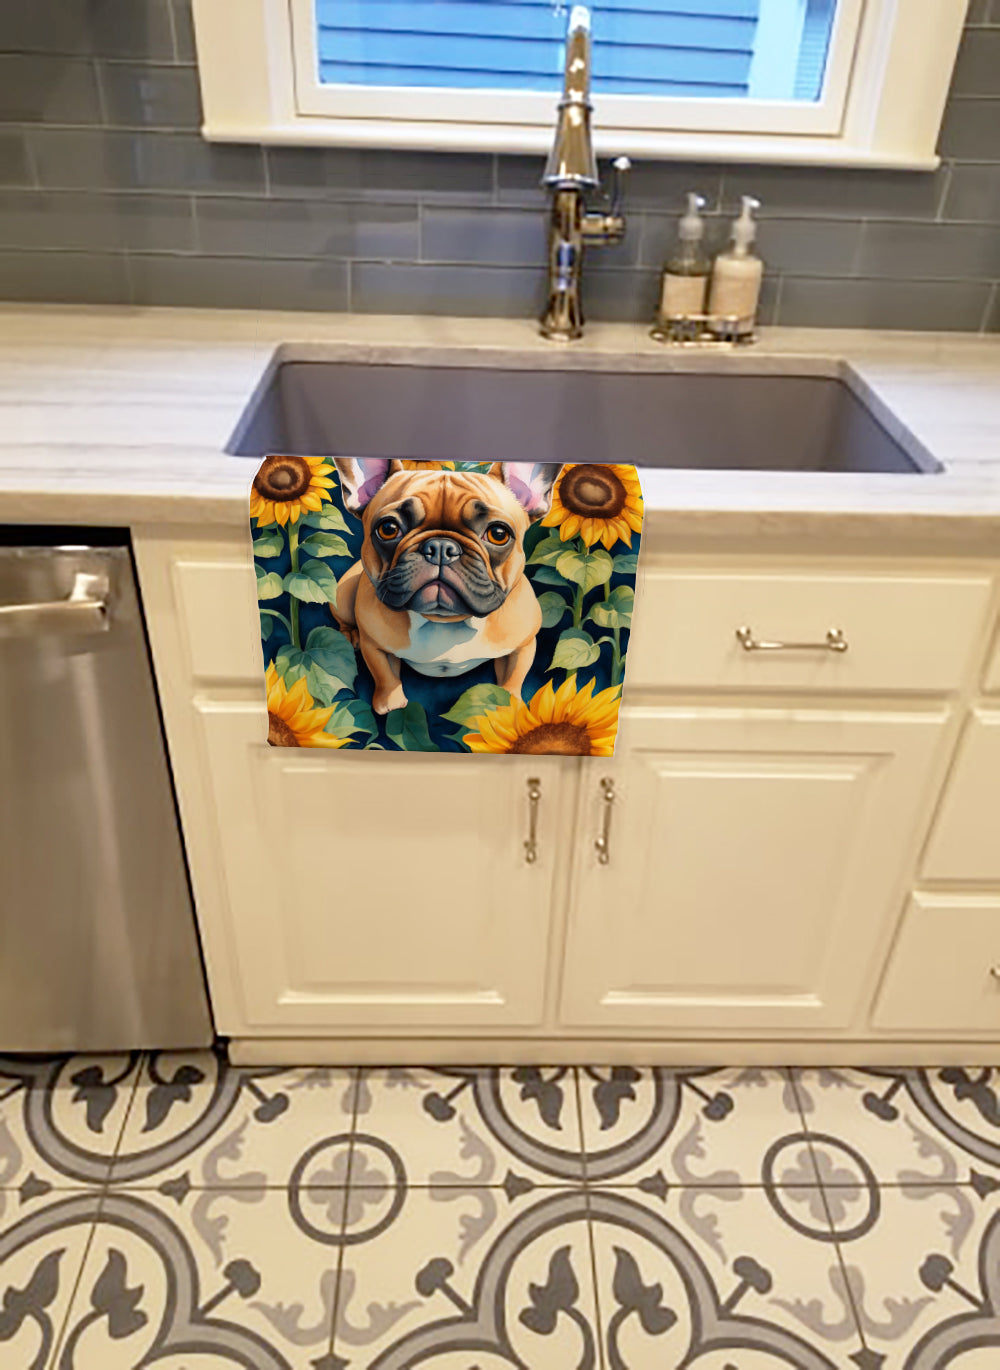 Buy this French Bulldog in Sunflowers Kitchen Towel